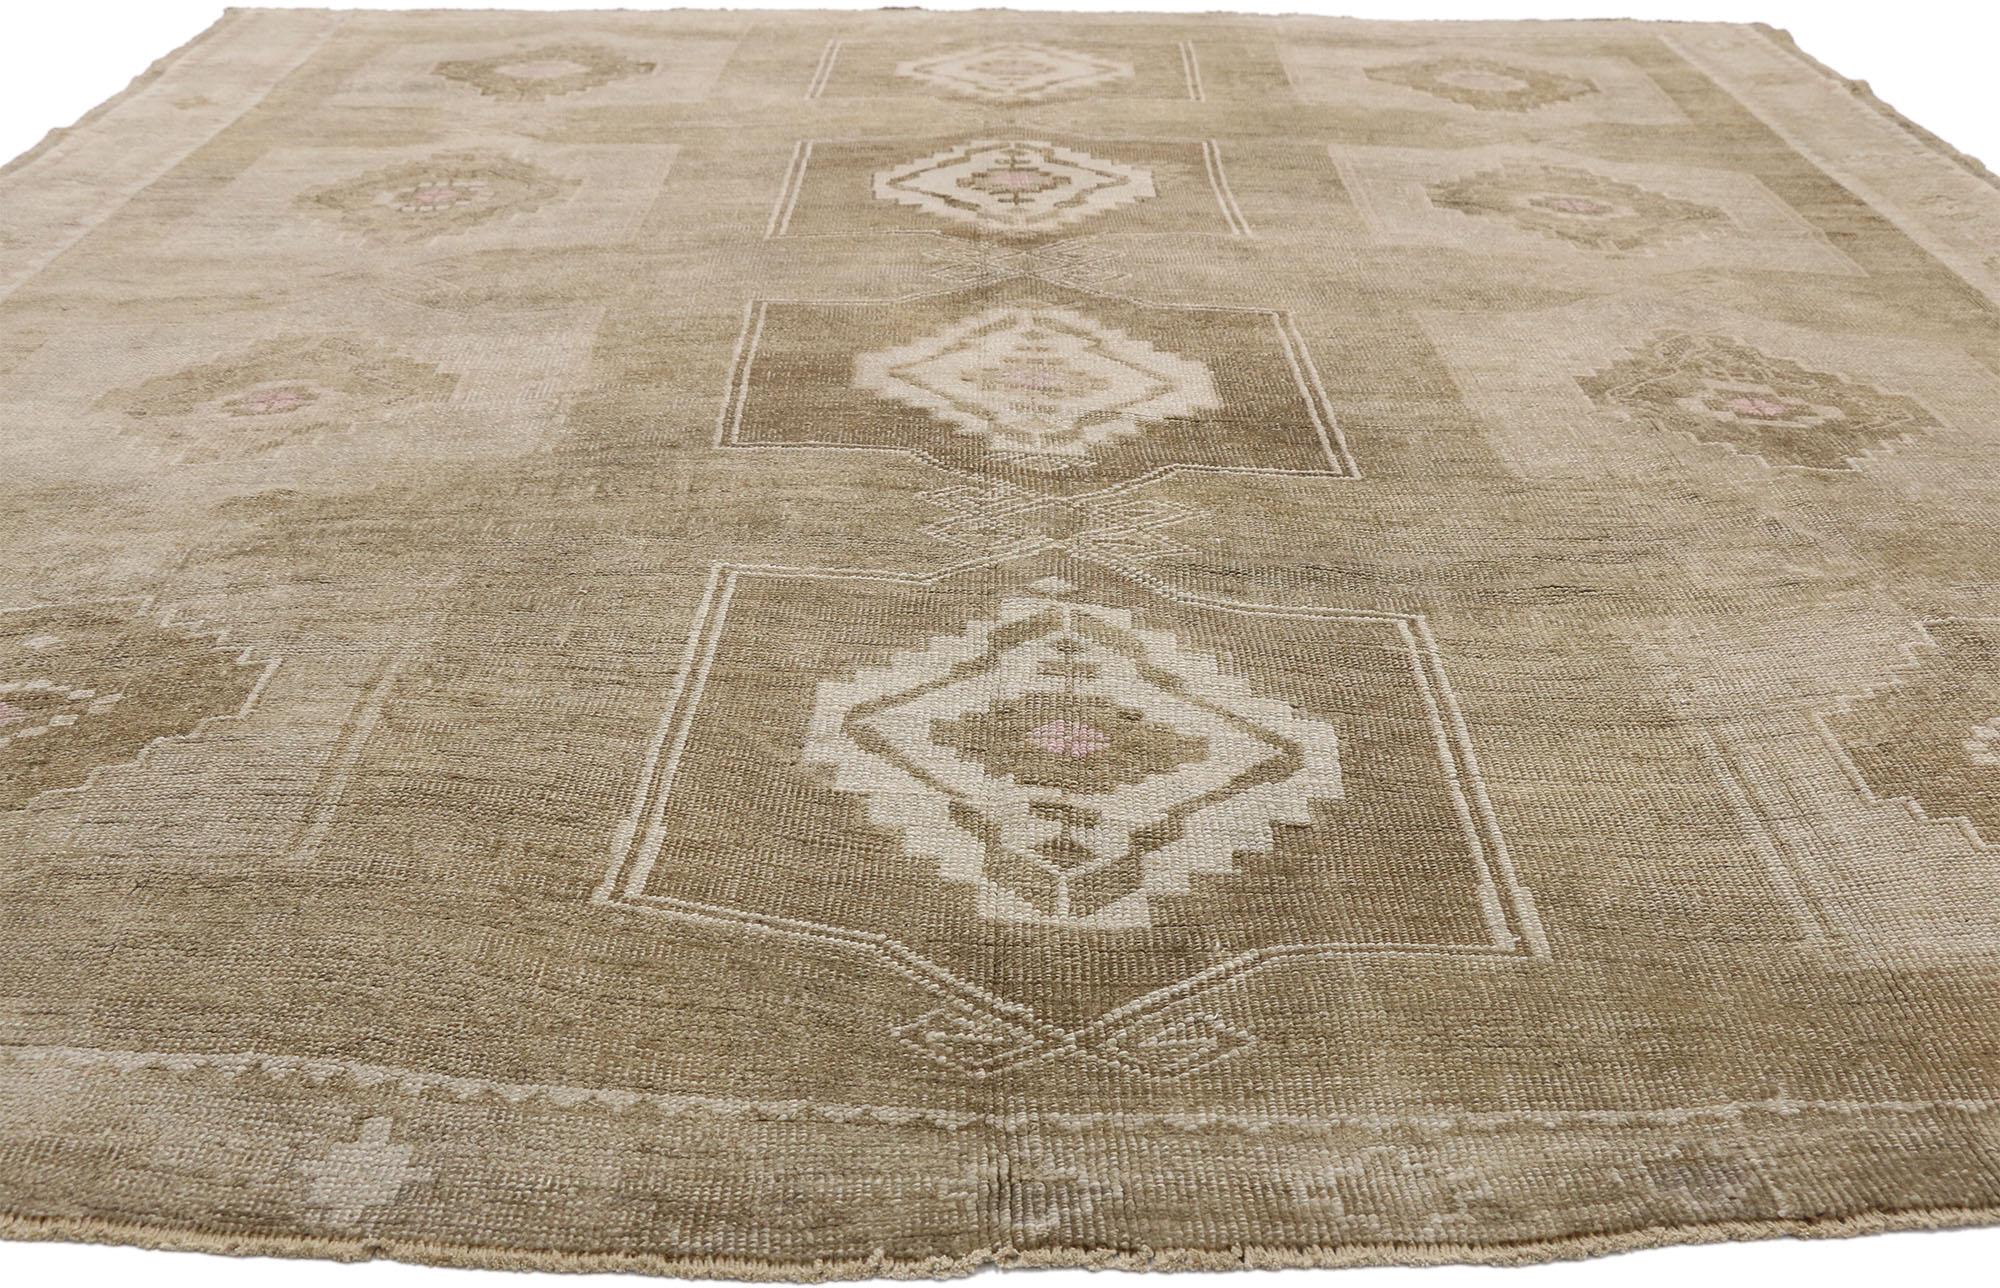 mission style area rugs